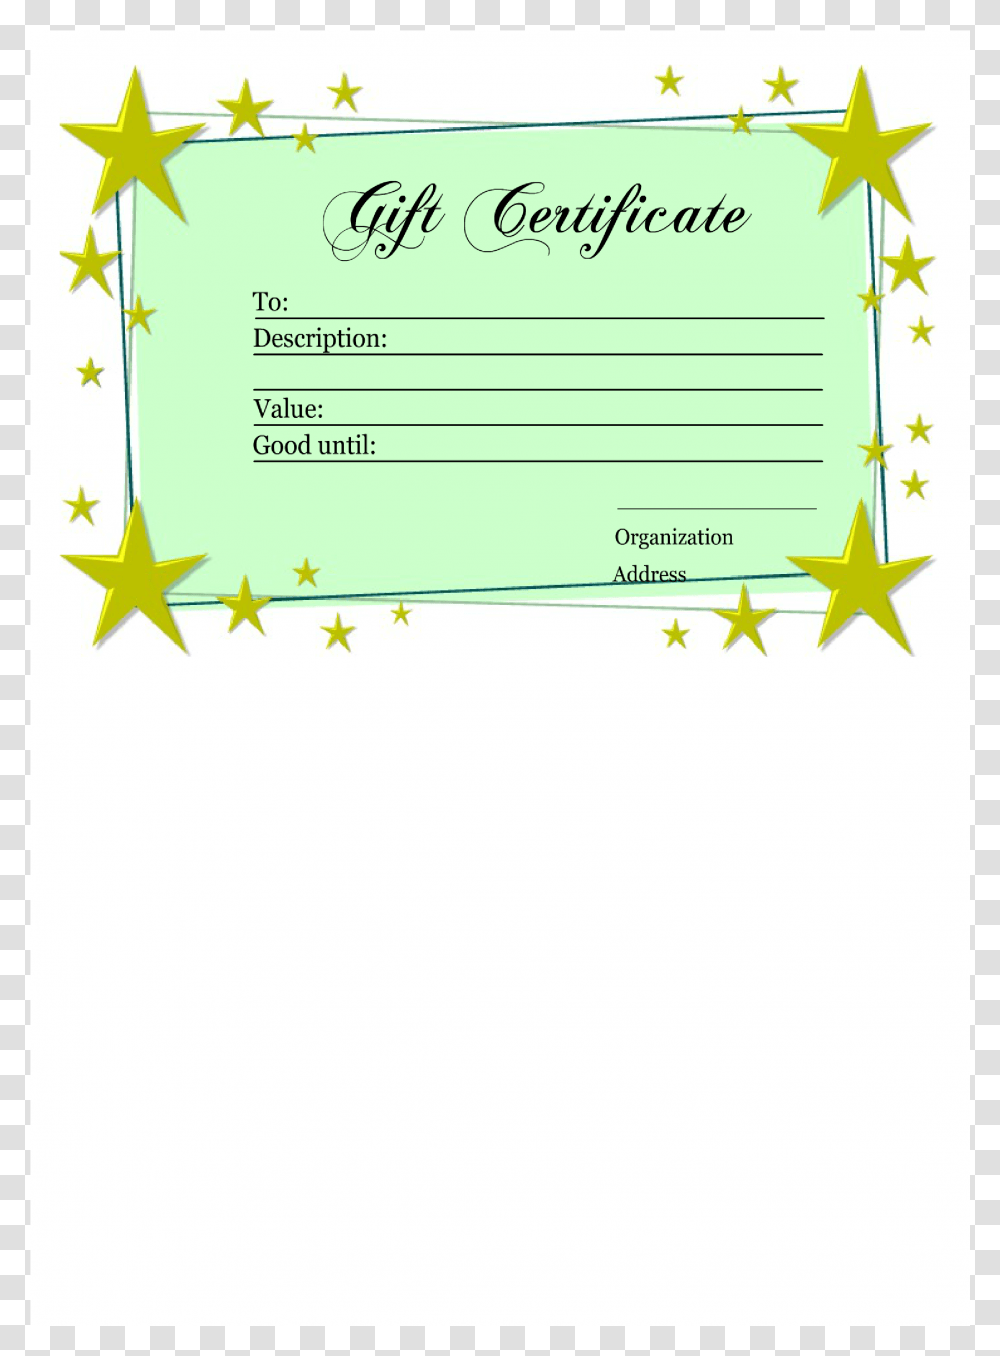 Homemade Gift Certificate Template Main Image Printable Voucher Throughout Printable Gift Certificates Templates Free